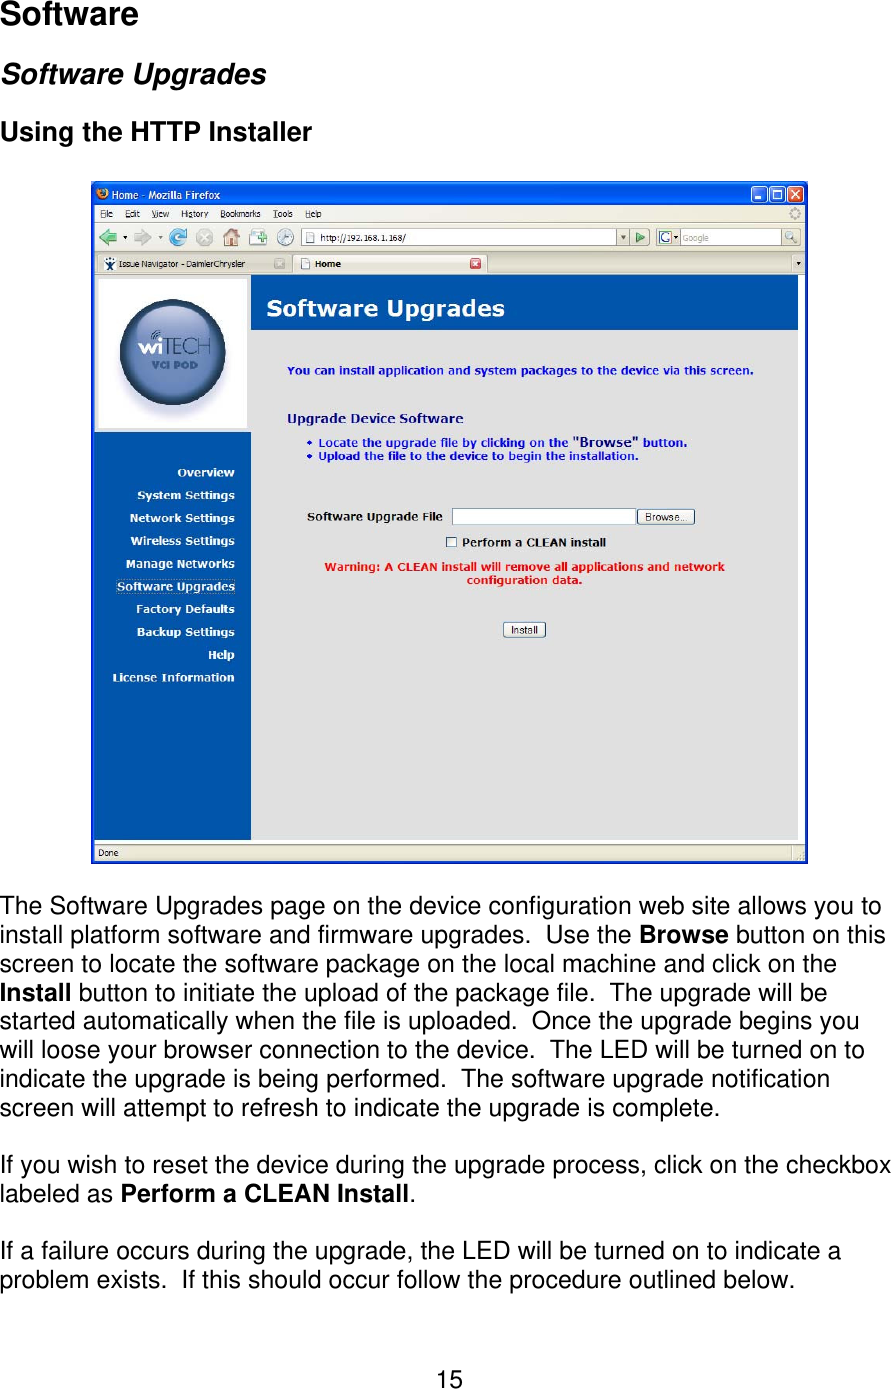   15Software Software Upgrades Using the HTTP Installer     The Software Upgrades page on the device configuration web site allows you to install platform software and firmware upgrades.  Use the Browse button on this screen to locate the software package on the local machine and click on the Install button to initiate the upload of the package file.  The upgrade will be started automatically when the file is uploaded.  Once the upgrade begins you will loose your browser connection to the device.  The LED will be turned on to indicate the upgrade is being performed.  The software upgrade notification screen will attempt to refresh to indicate the upgrade is complete.  If you wish to reset the device during the upgrade process, click on the checkbox labeled as Perform a CLEAN Install.  If a failure occurs during the upgrade, the LED will be turned on to indicate a problem exists.  If this should occur follow the procedure outlined below. 